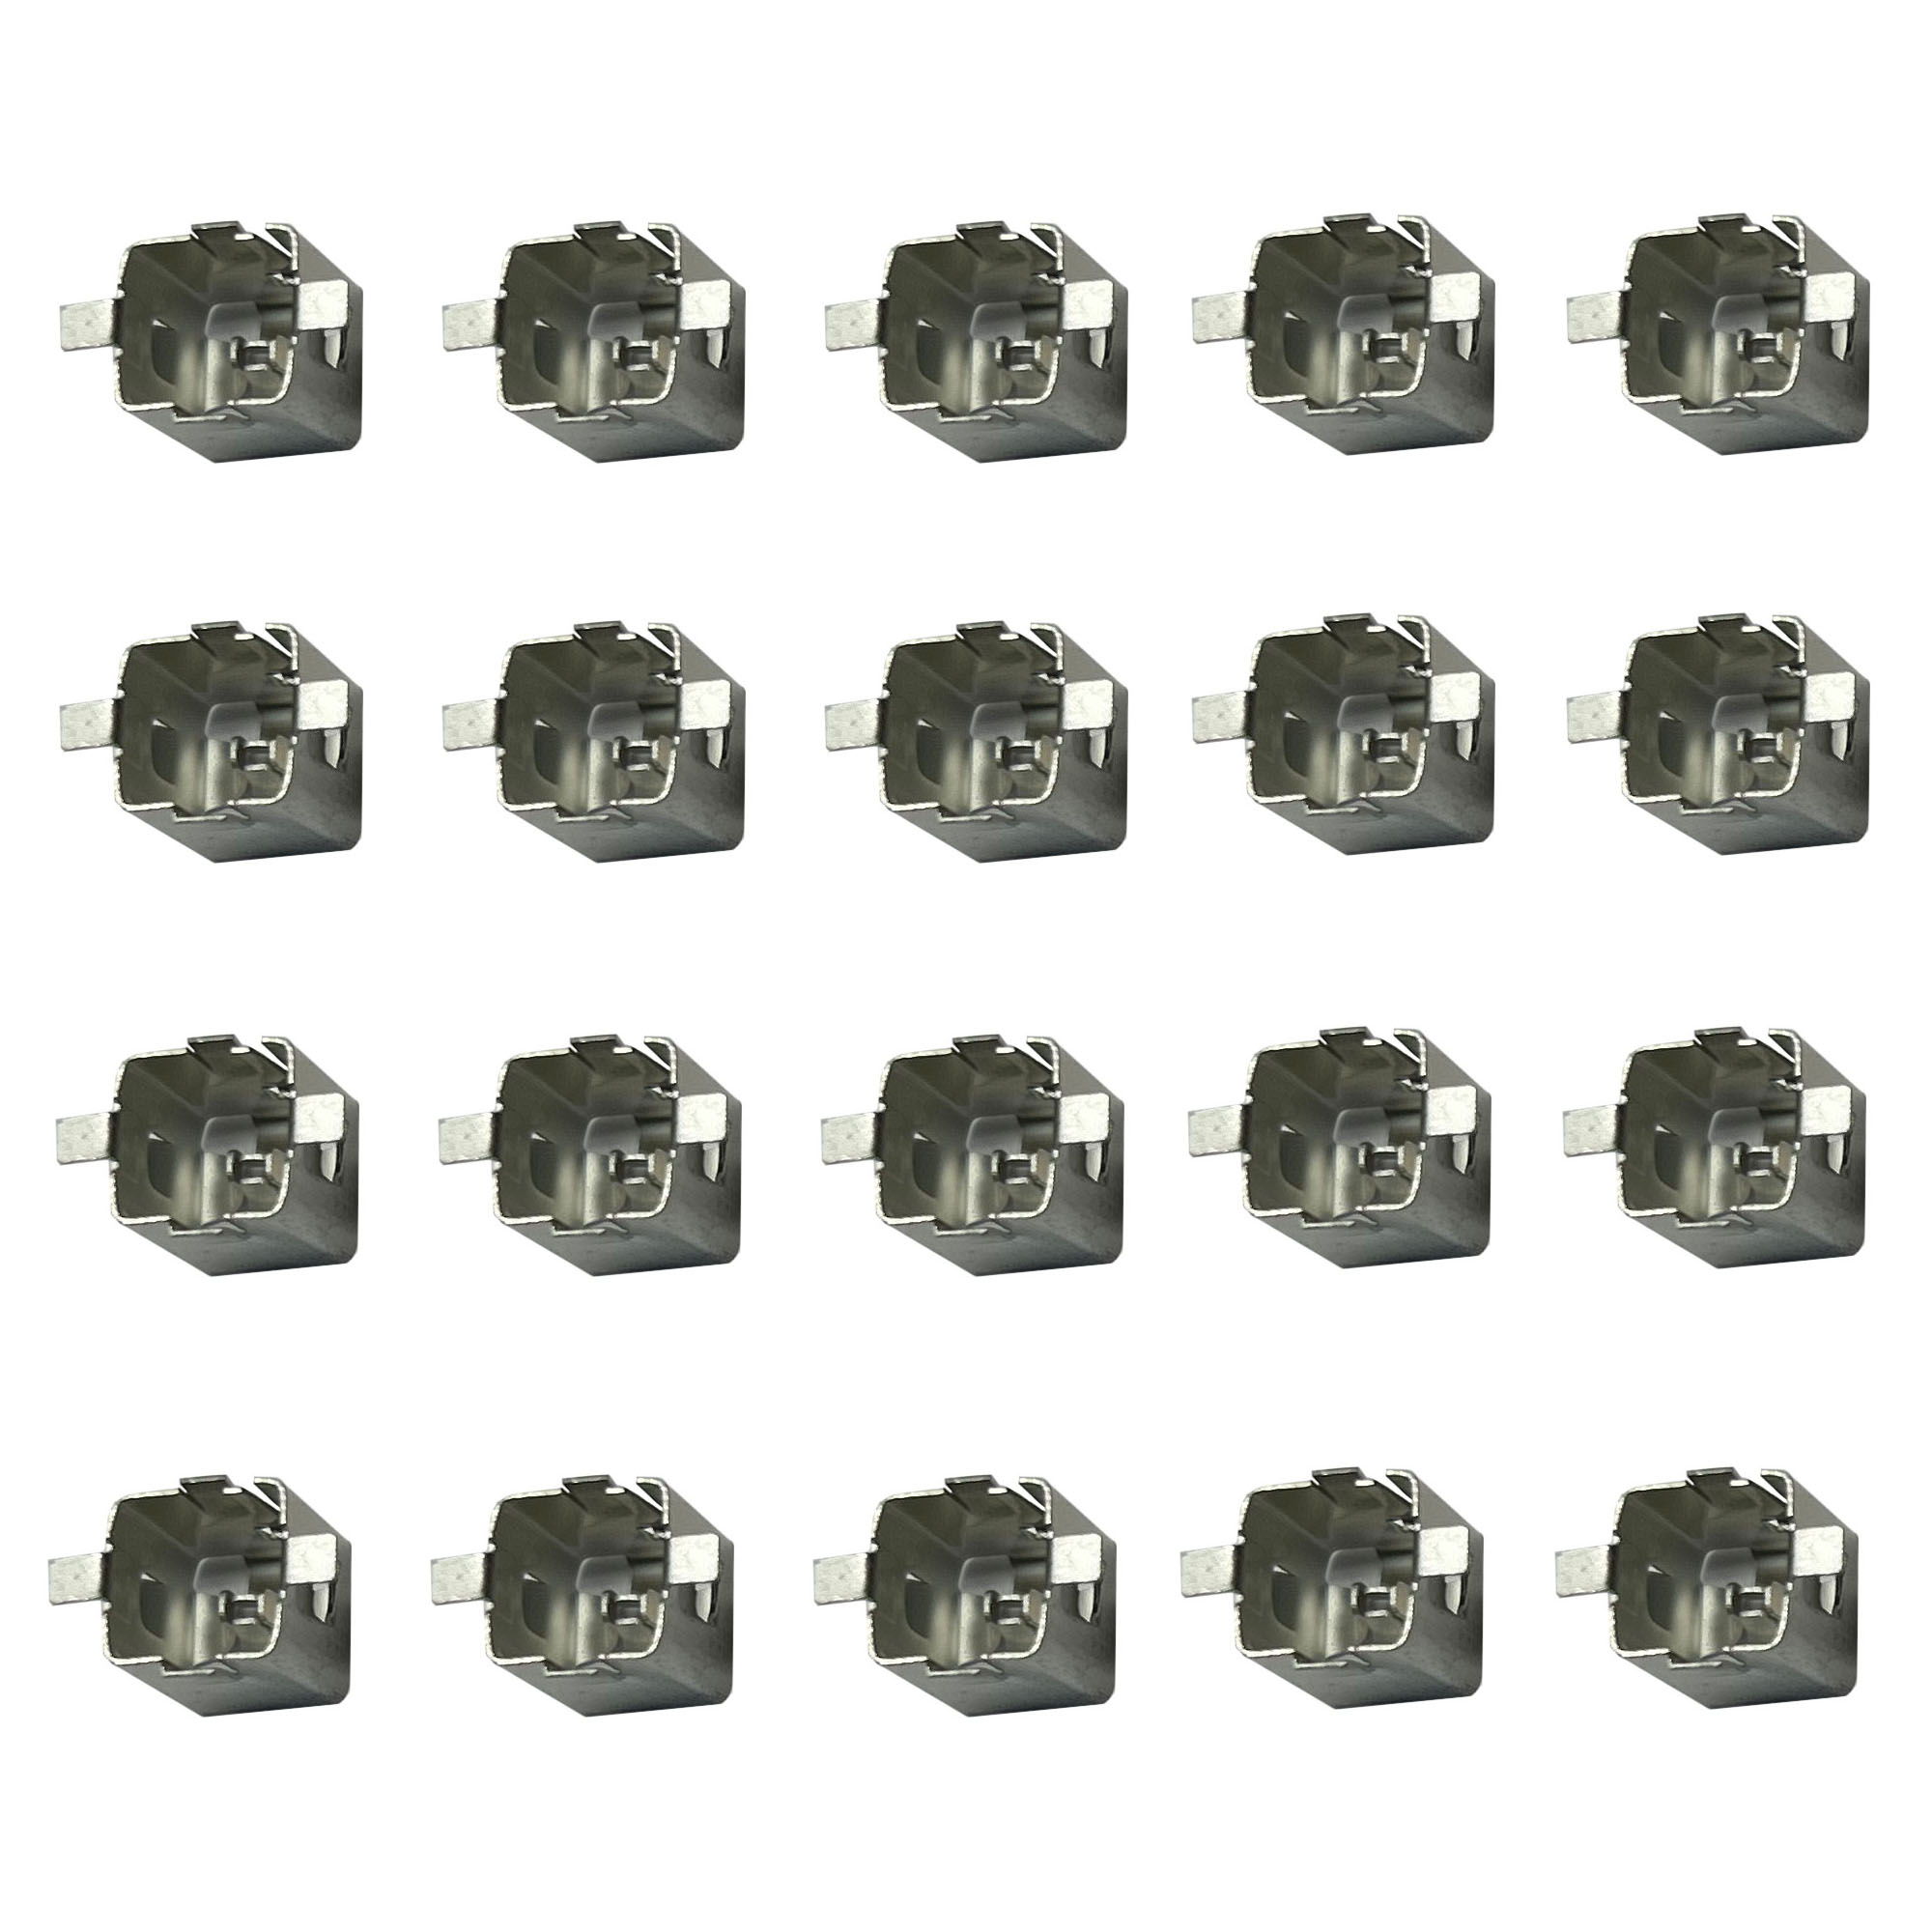 1970 Chevrolet Monte Carlo GAUGE CLUSTER PRINTED CIRCUIT BOARD RETAINER CLIPS; 20 PIECES IN ONE PACKAGE. | IN10224Z